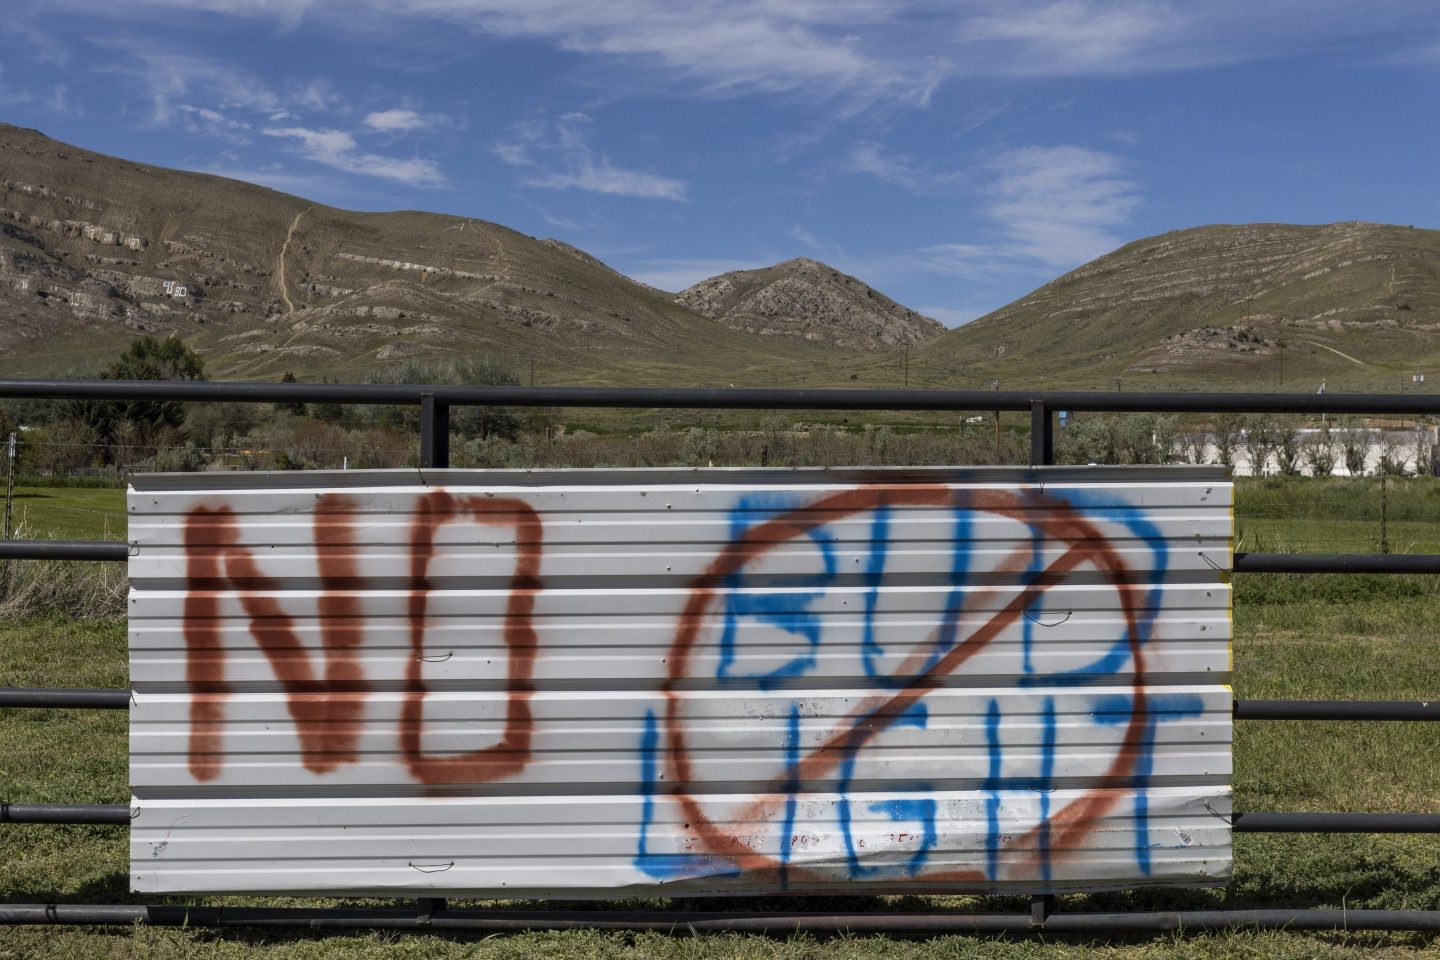 Hand-painted sign expressing a boycott of Bud Light in Idaho